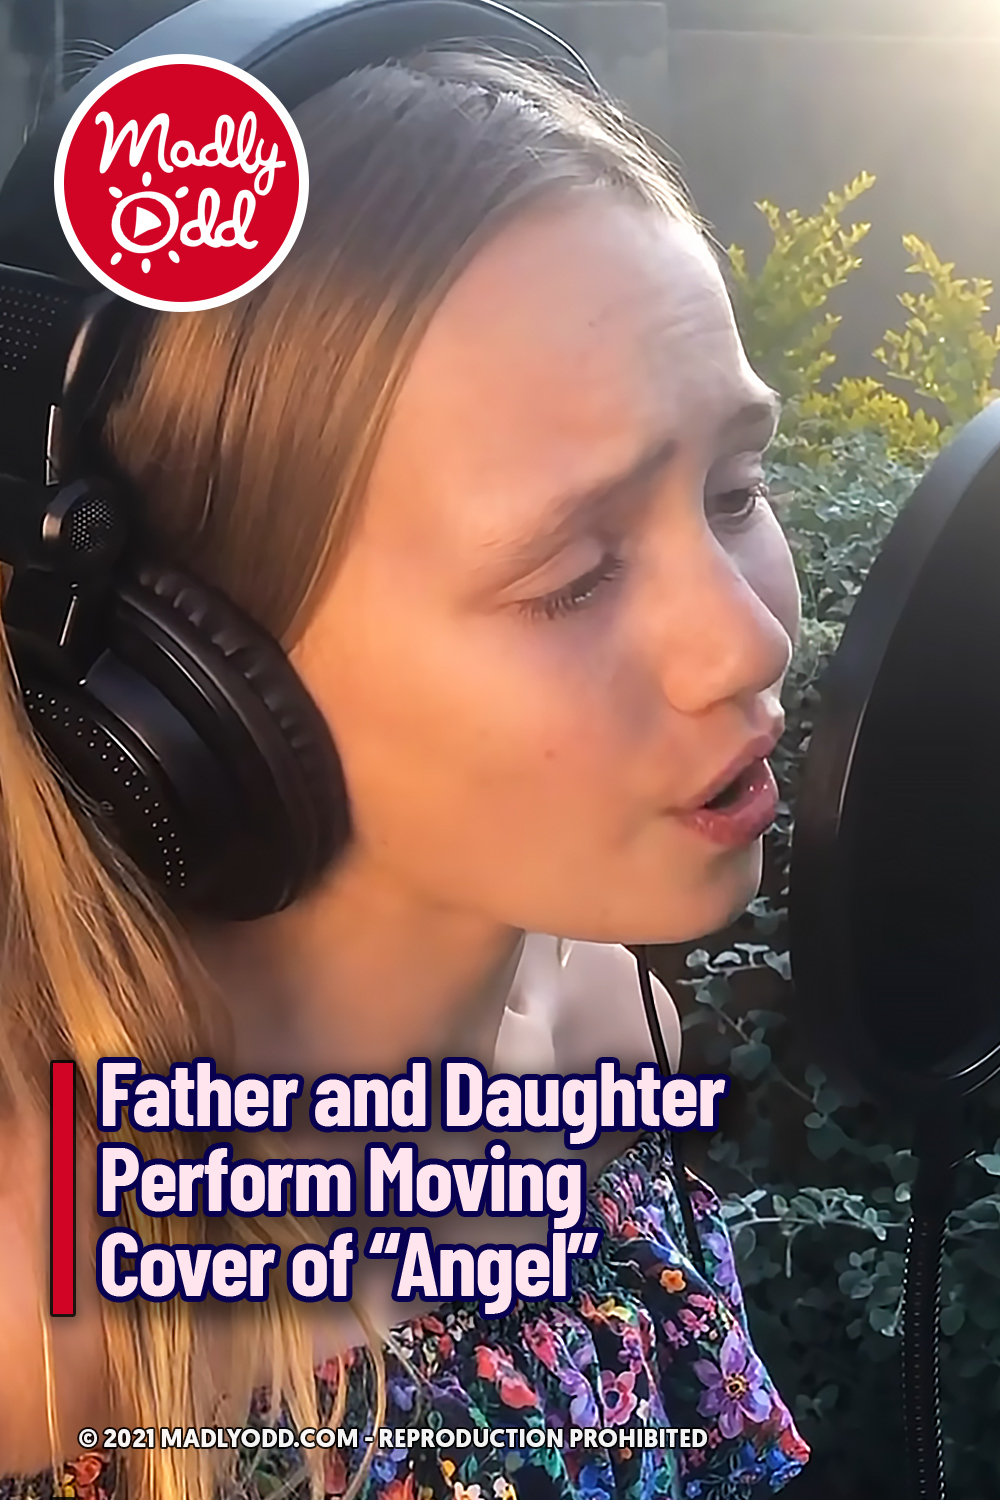 Father and Daughter Perform Moving Cover of “Angel”